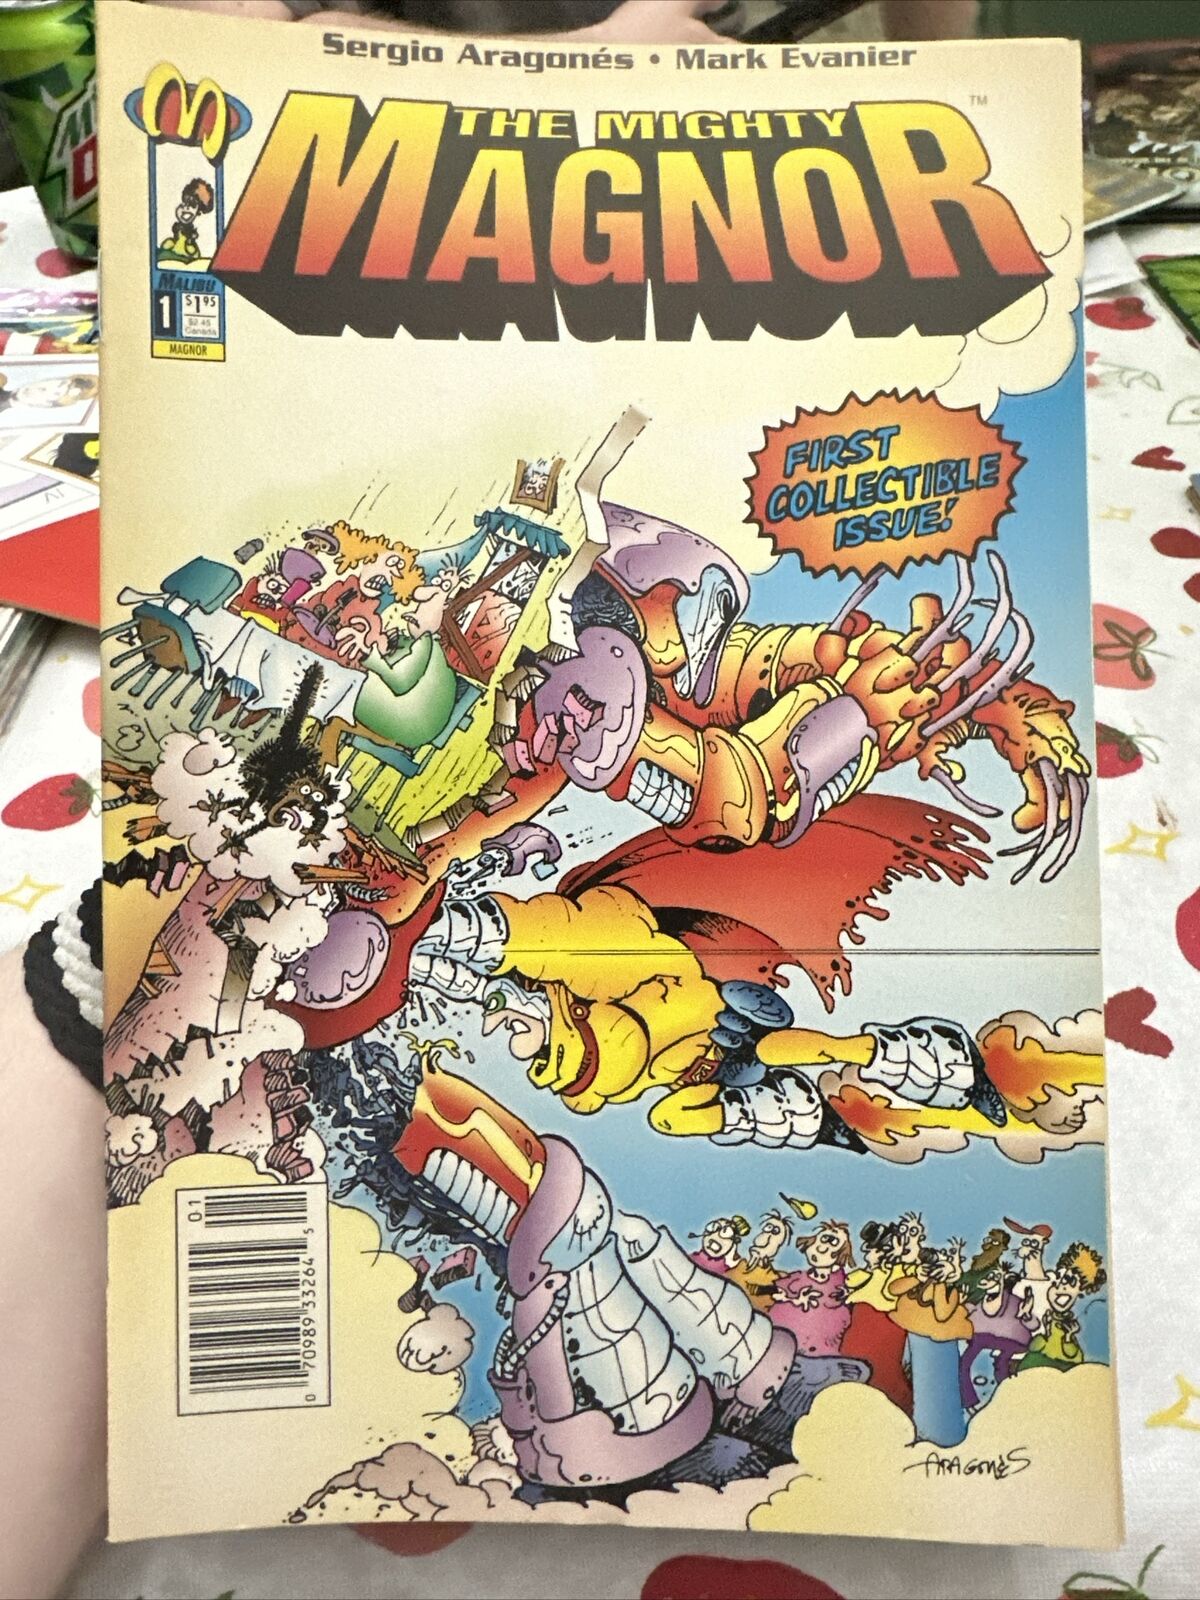 The Mighty Magnor #1 (1993)